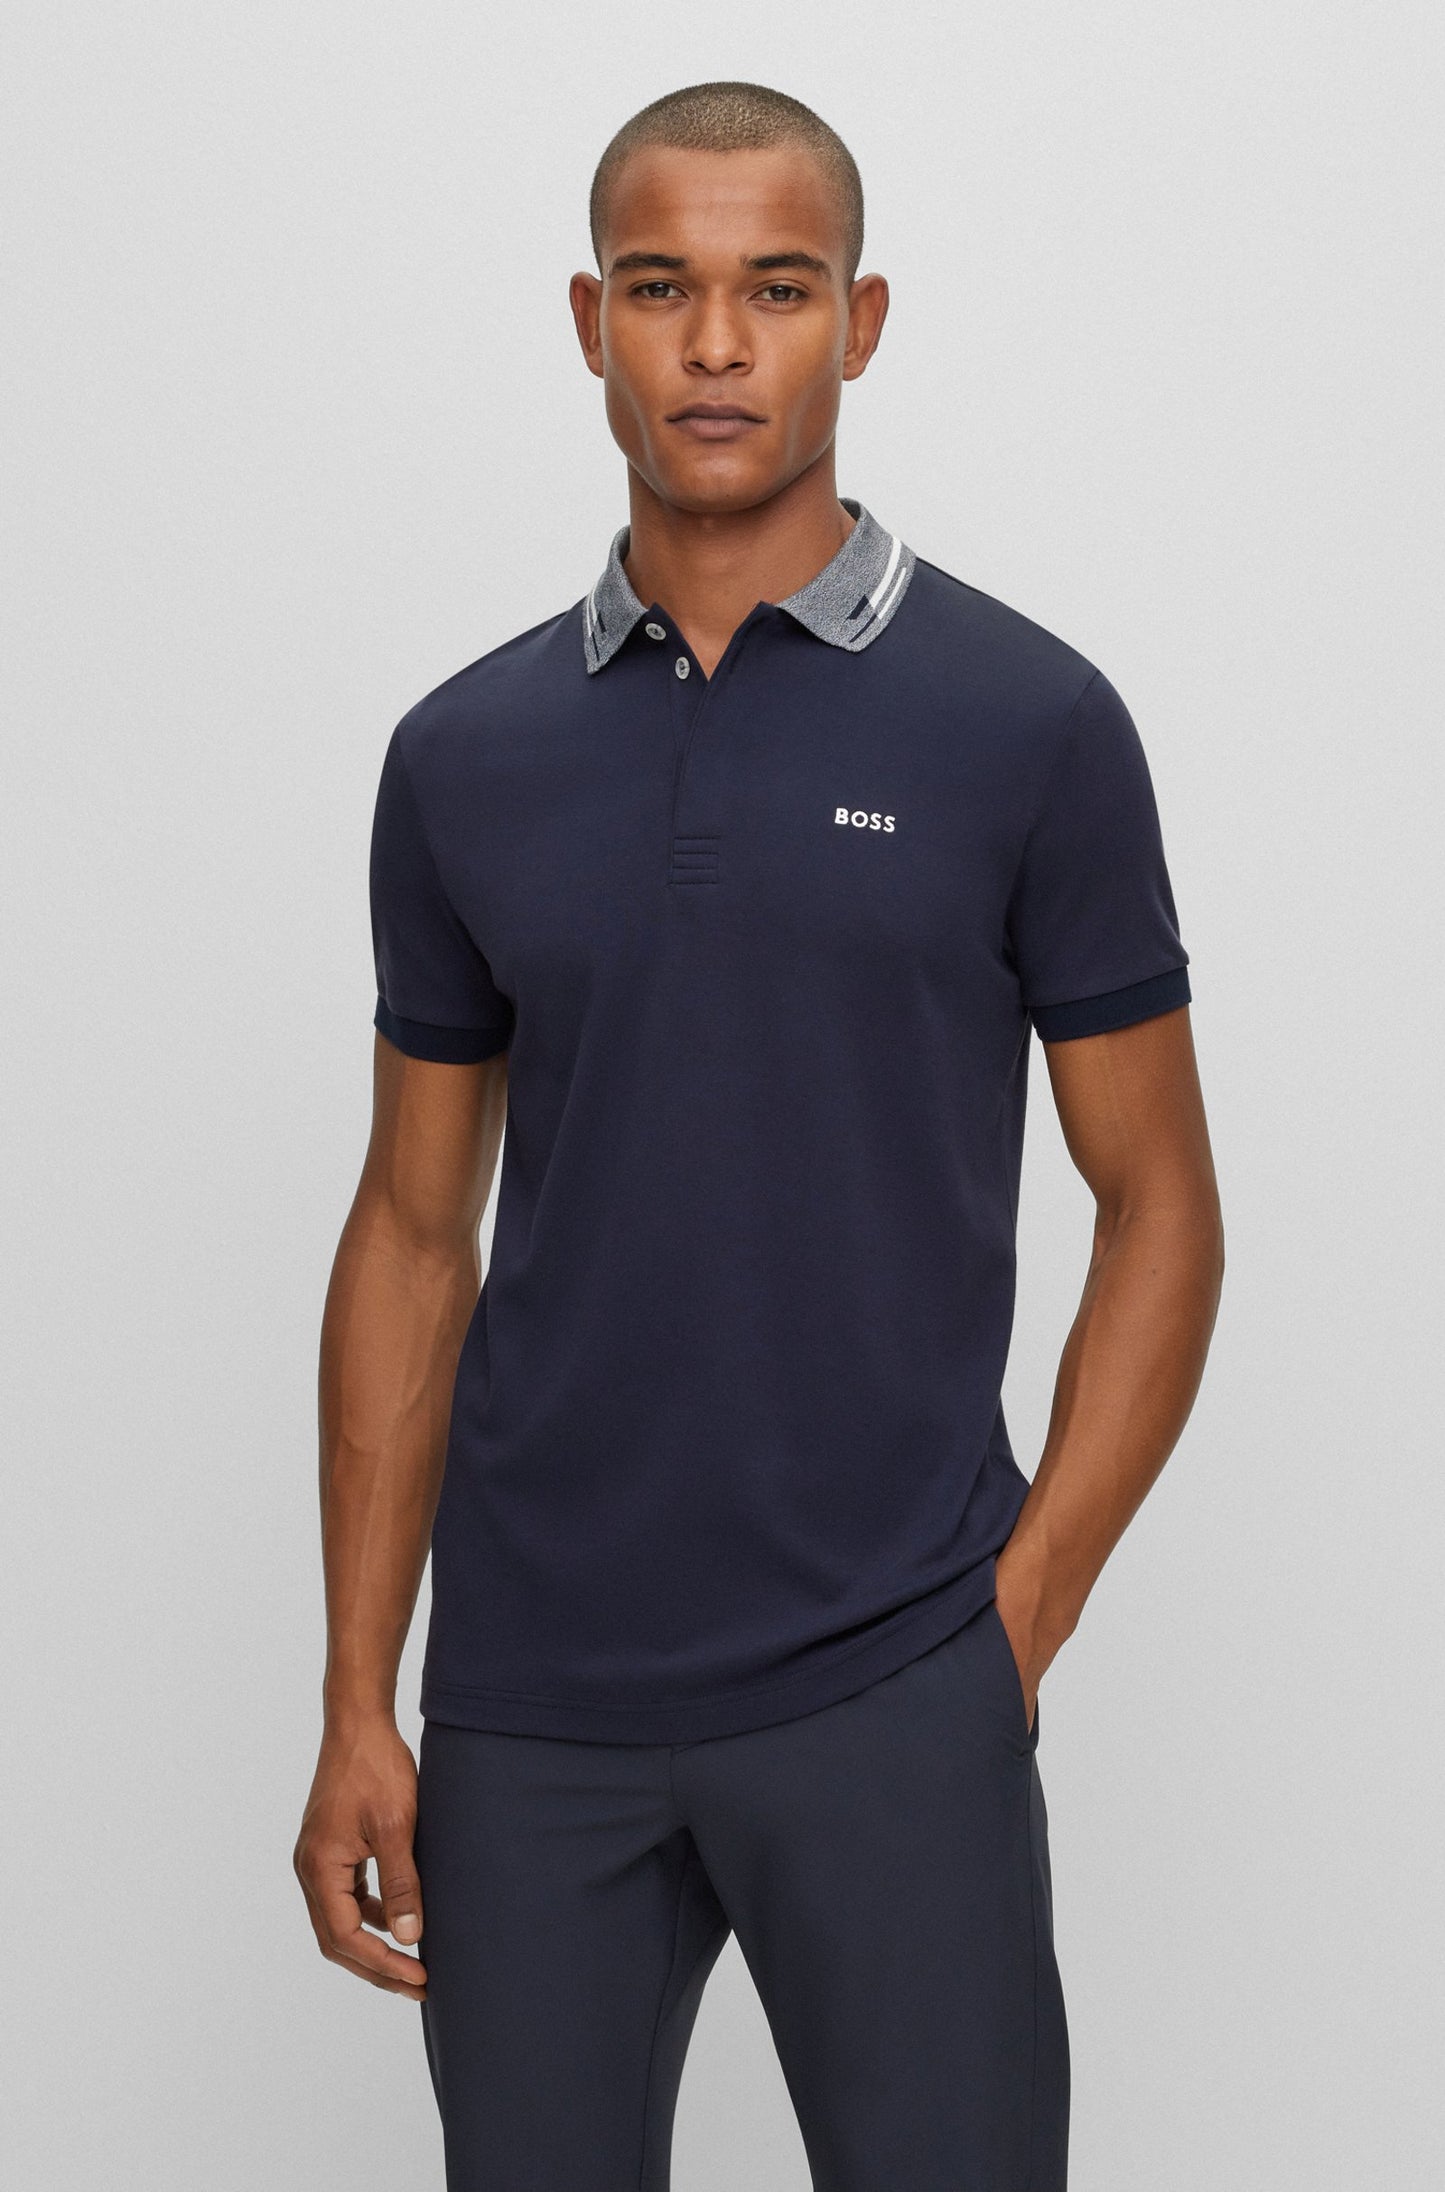 Boss Interlock Cotton Polo Shirt With Embroidered Logo